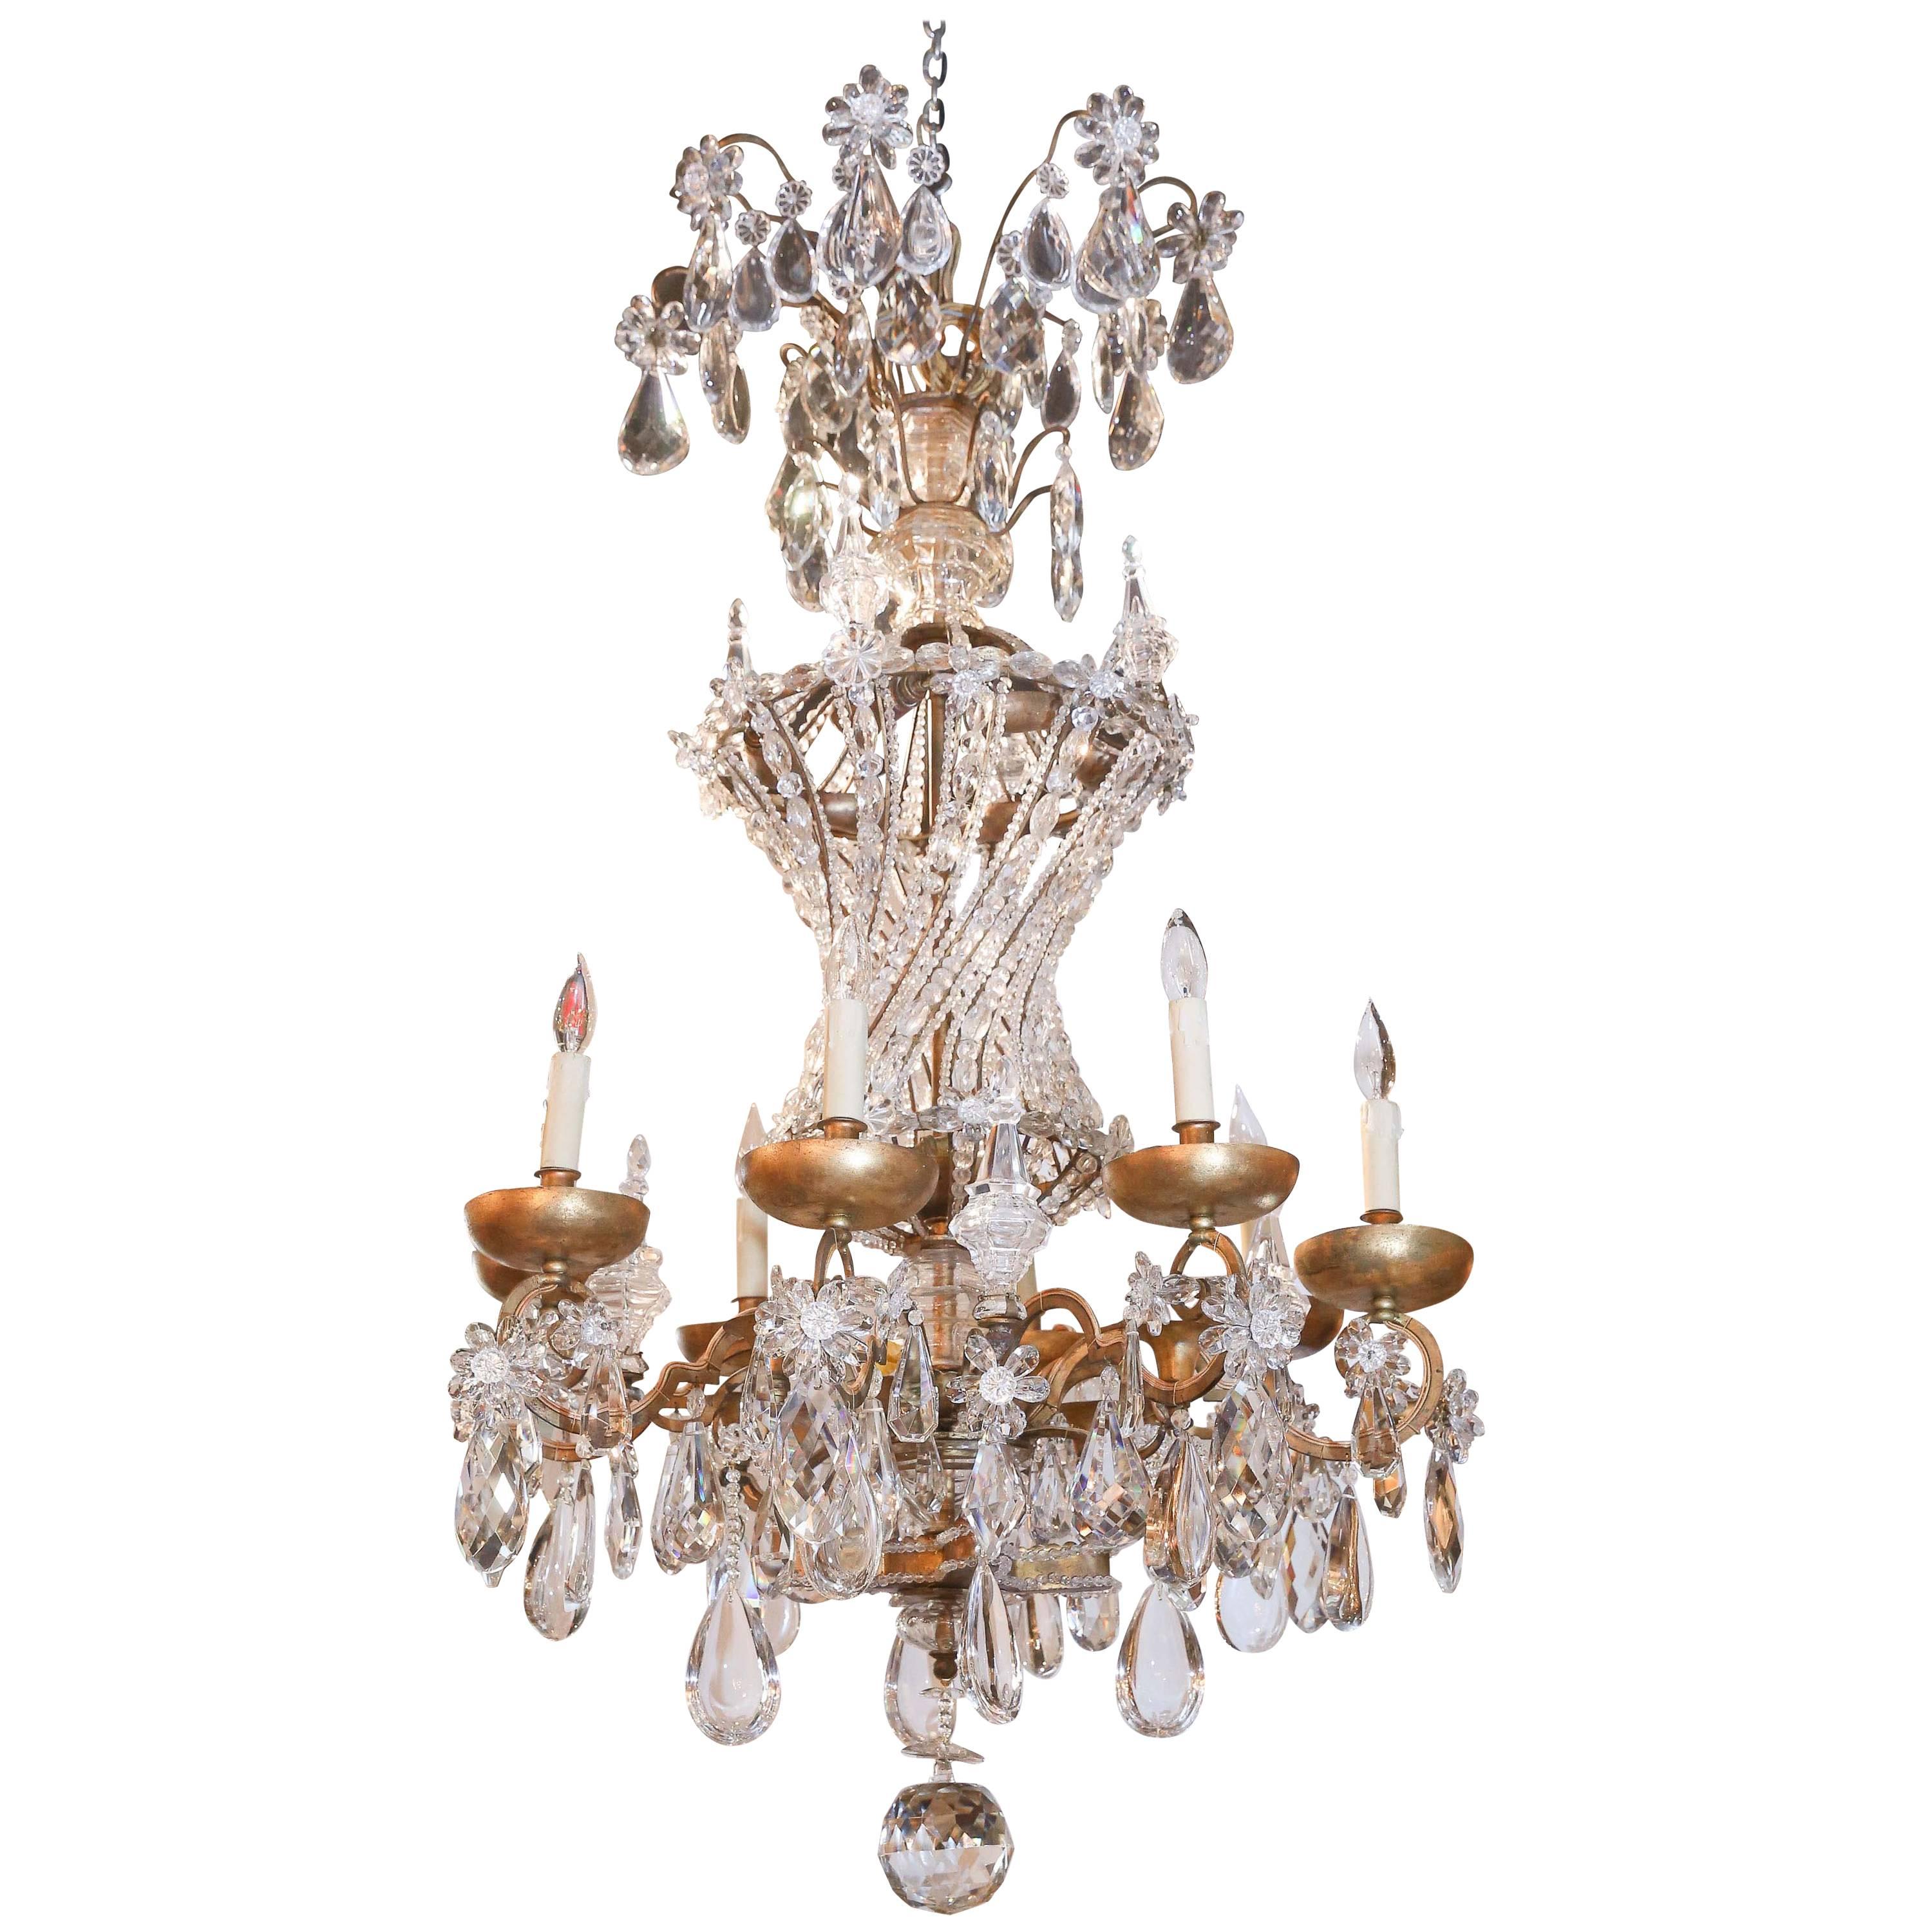 Impressive Bagues Chandelier, Large Size and Bronze and Crystal in swirl design